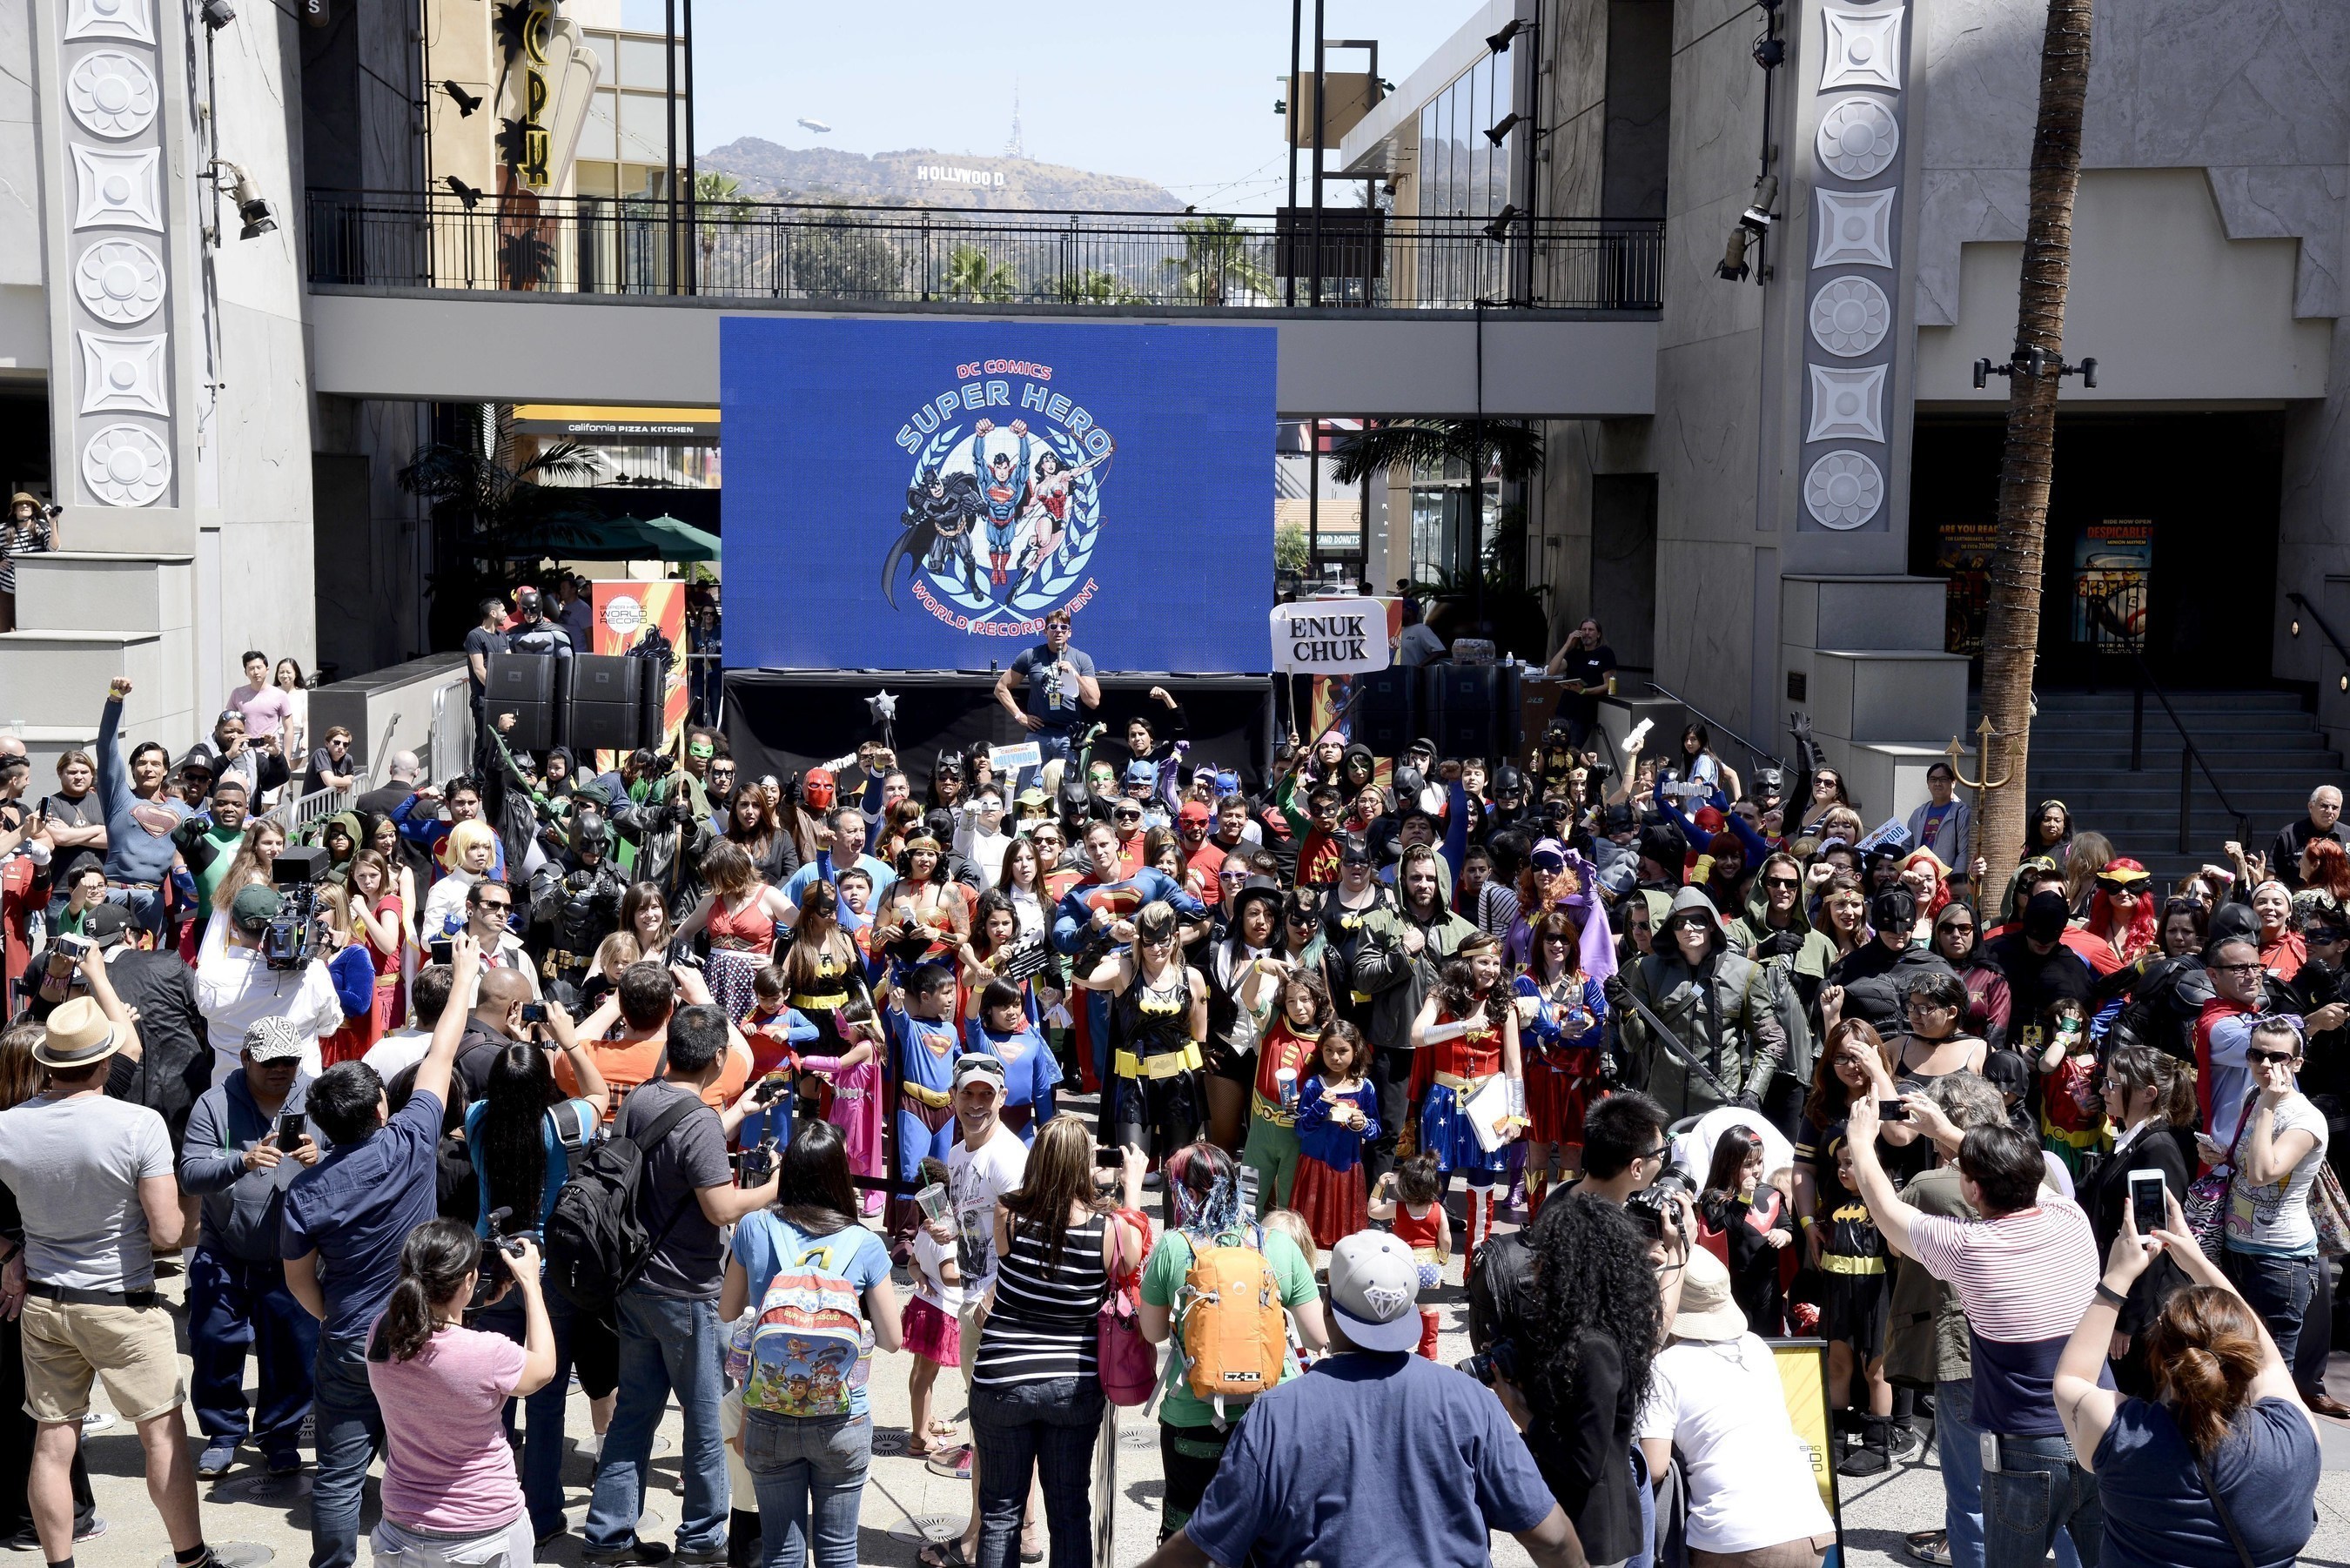 Fans dressed as DC Comics Super Heroes gather to set the Guinness World Record for most people dressed as DC Comics Super Heroes within a 24-hour period at the DC Comics Super Hero World Record Event at the Hollywood & Highland Center on April 18, 2015 in Los Angeles, California.